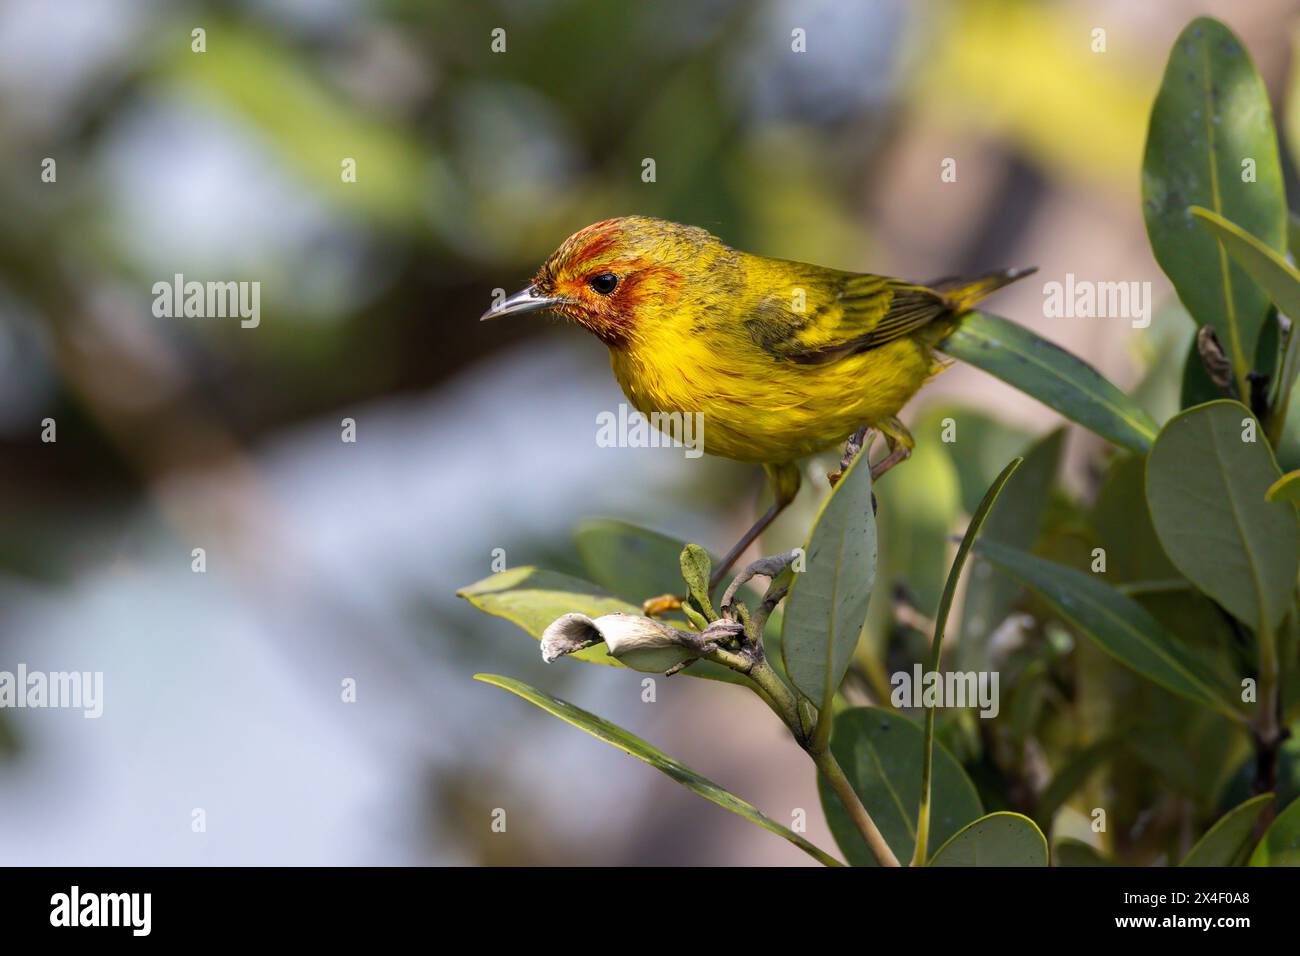 Male Mangrove warbler, yellow warbler, South Padre Island, Texas Stock Photo